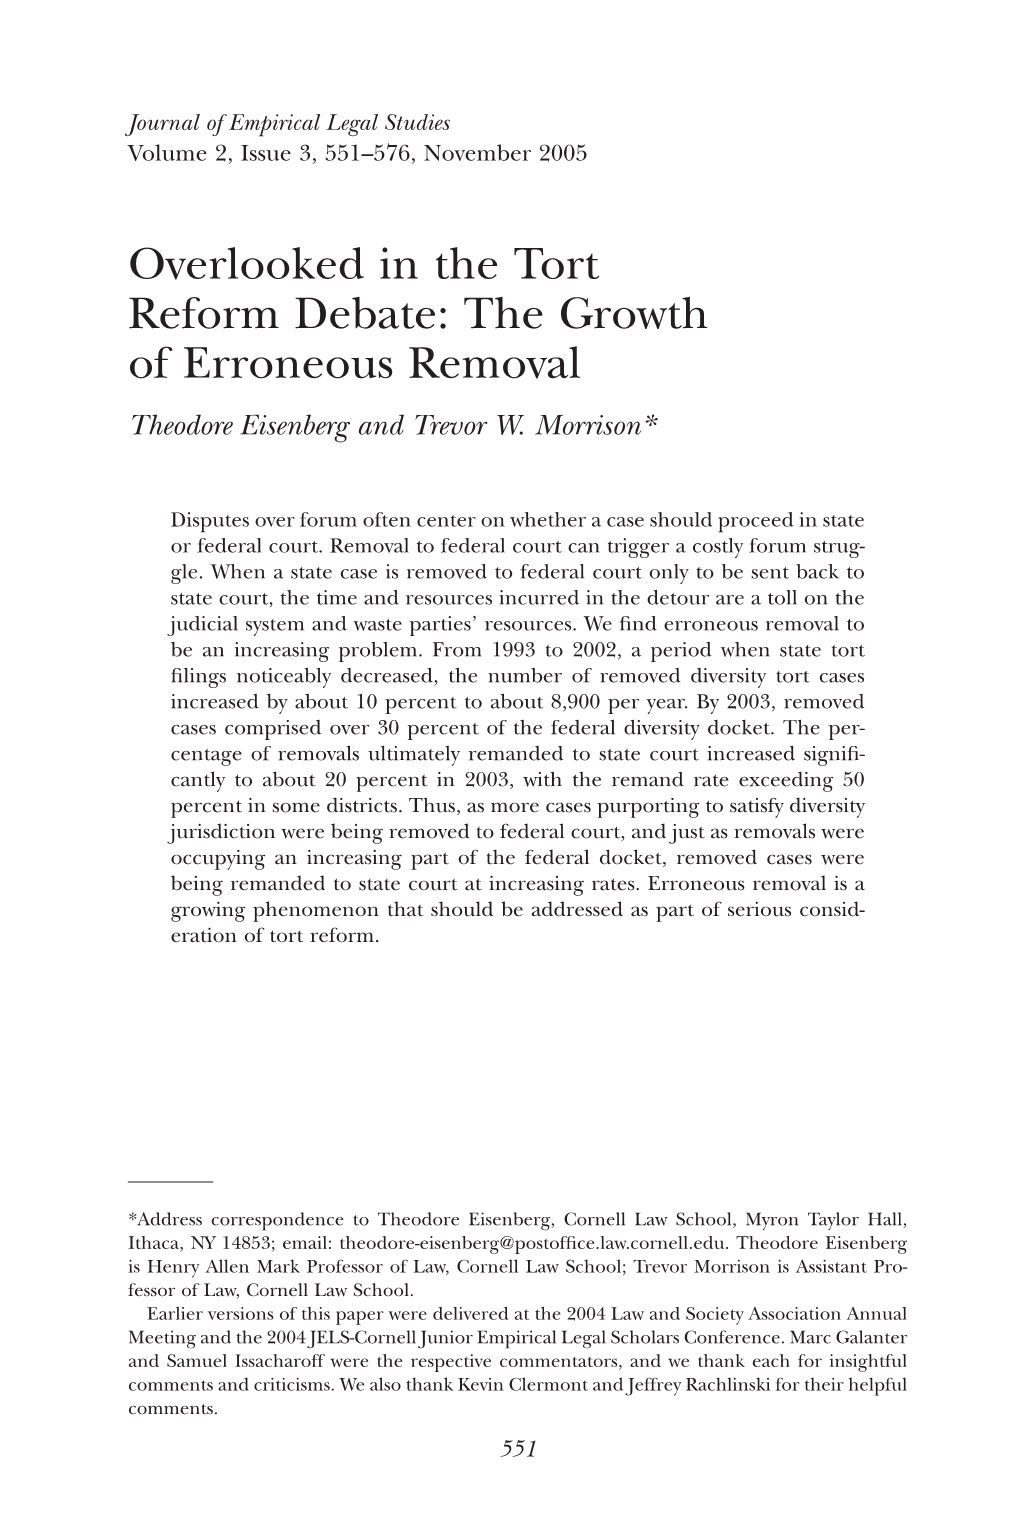 Overlooked in the Tort Reform Debate: the Growth of Erroneous Removal Theodore Eisenberg and Trevor W